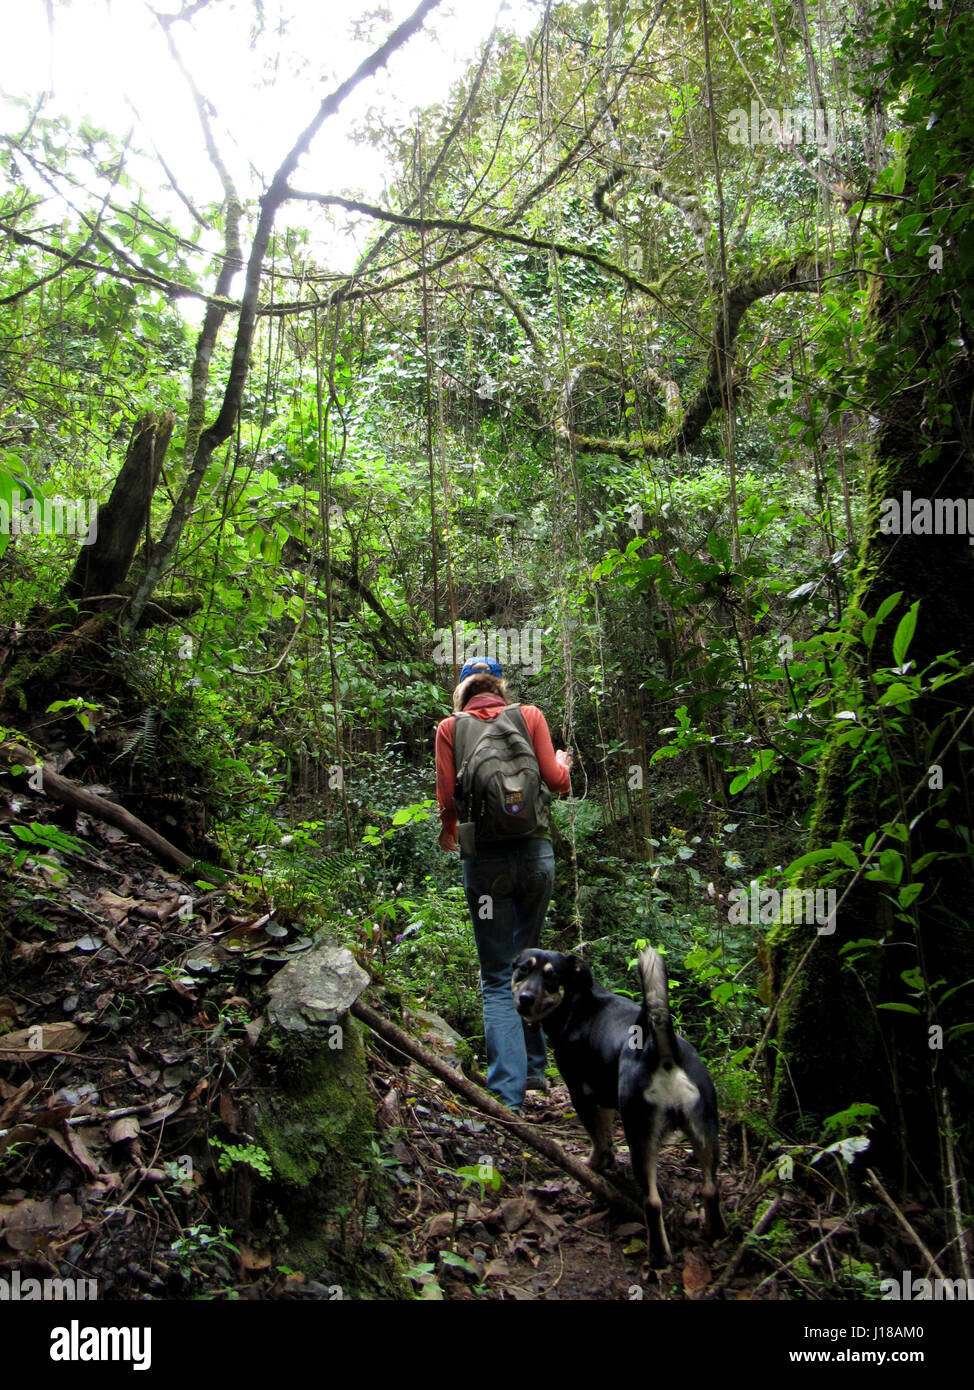 rear view of woman and dog hiking in rainforest Ecuador Stock Photo